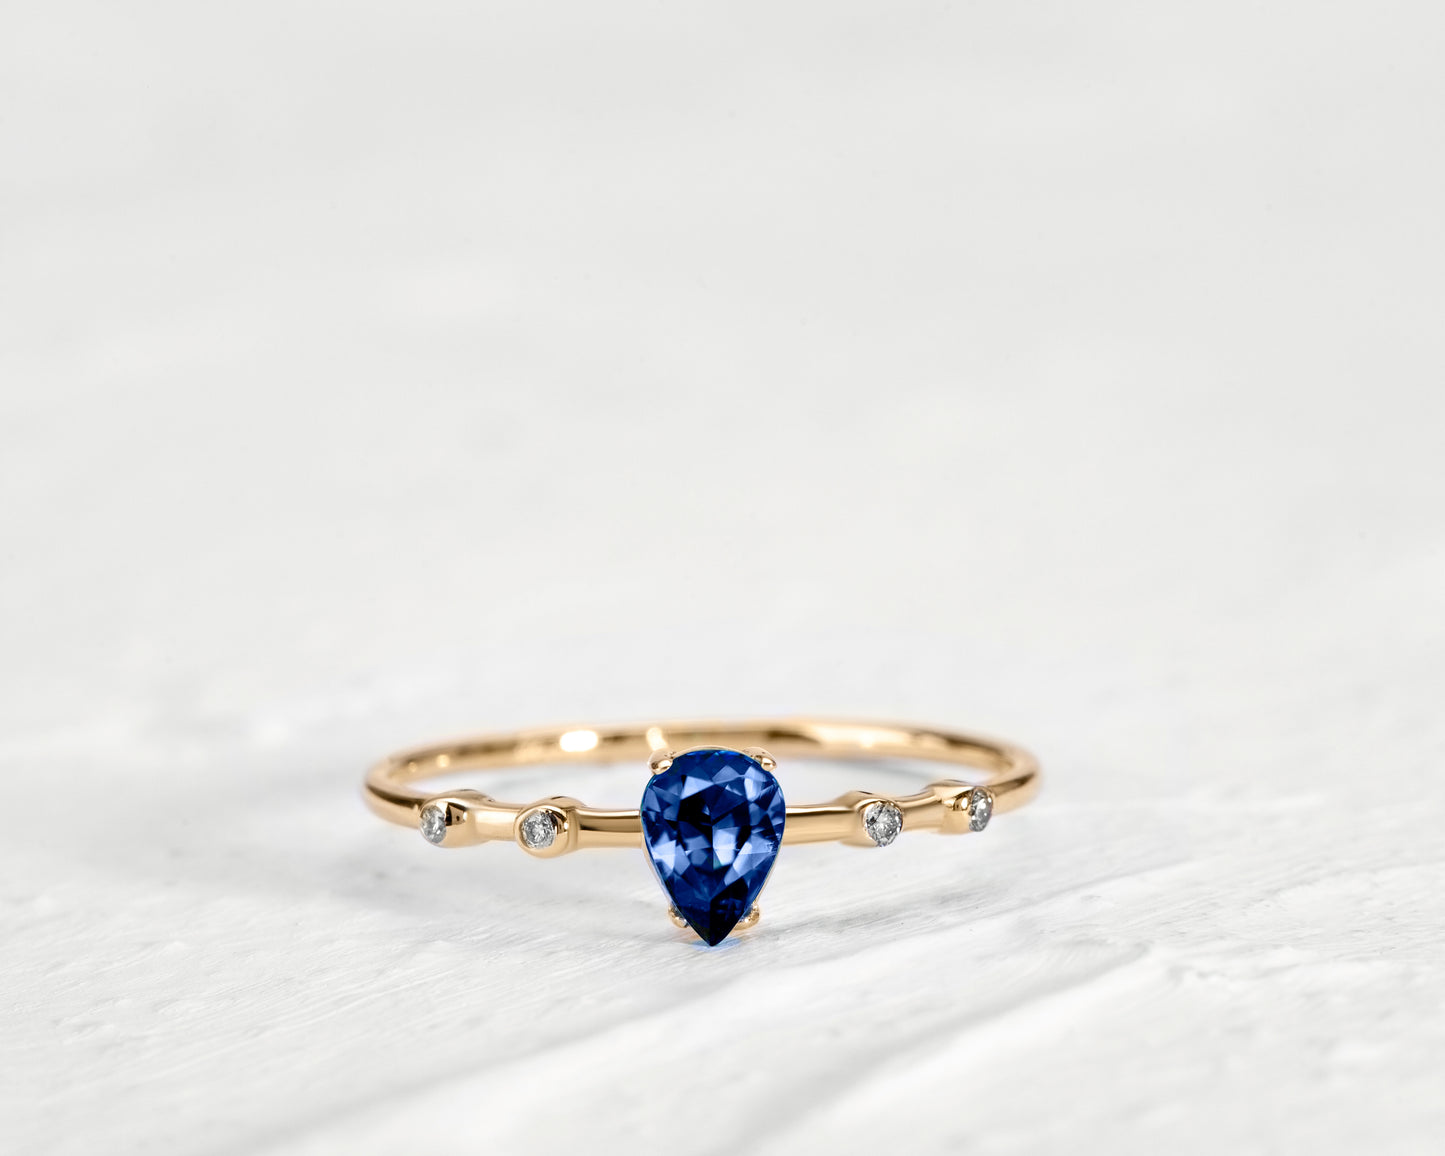 Dainty Ring Drop Ring Sapphire Drop cut with Sprinkled Diamonds 14K Gold